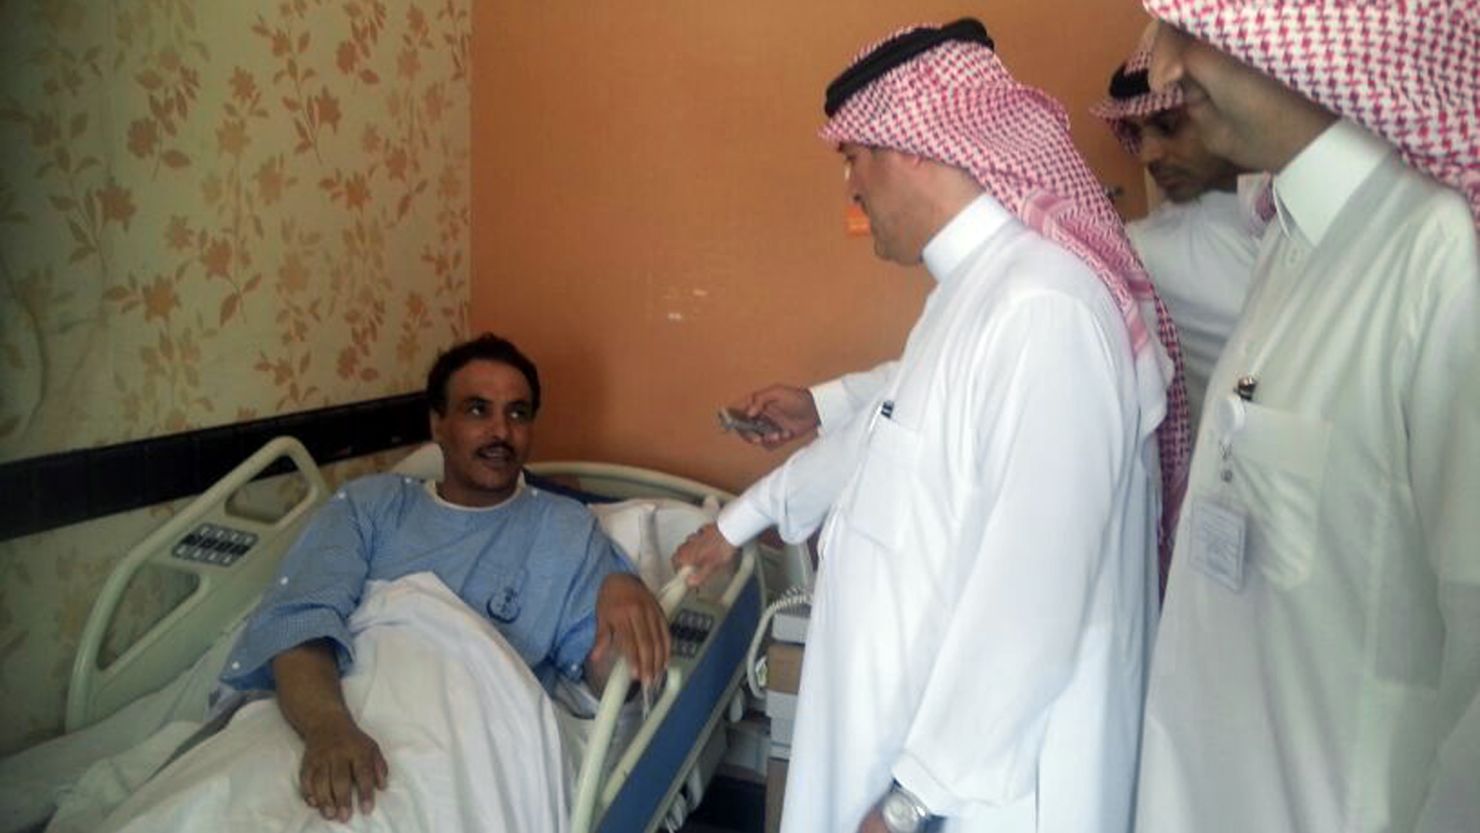 Saudi health ministry officials visits patients in the eastern province of al-Ahsaa on May 13, 2013.